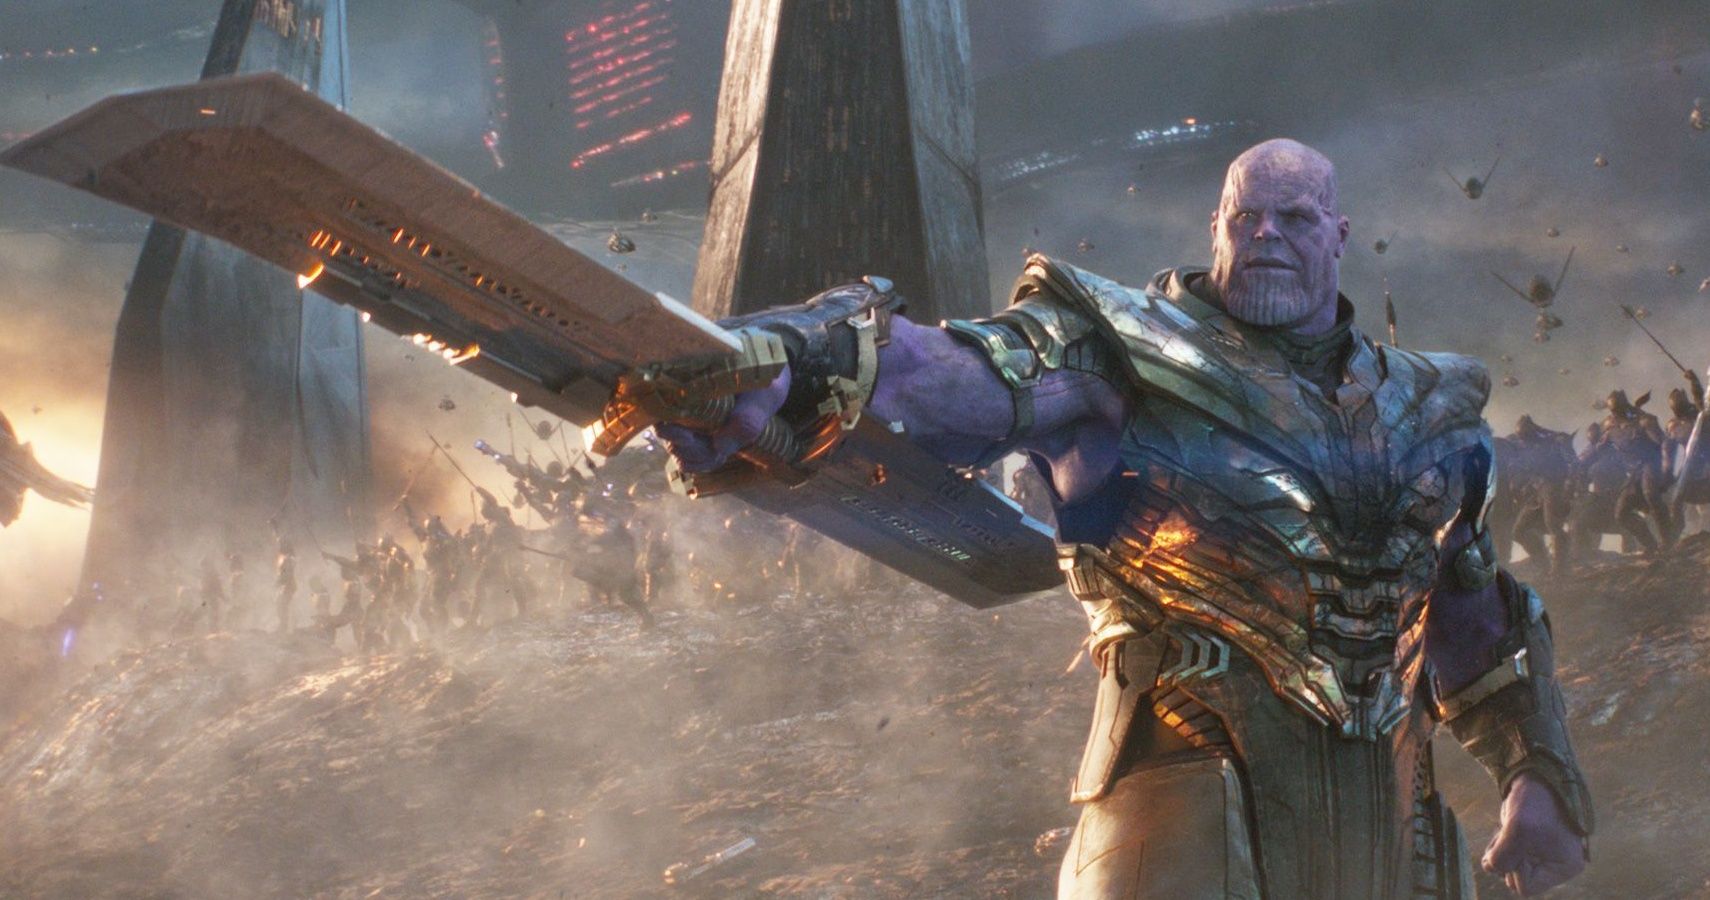 Thanos holding out his weapon and signaling his army to fight in Avengers: Endgame